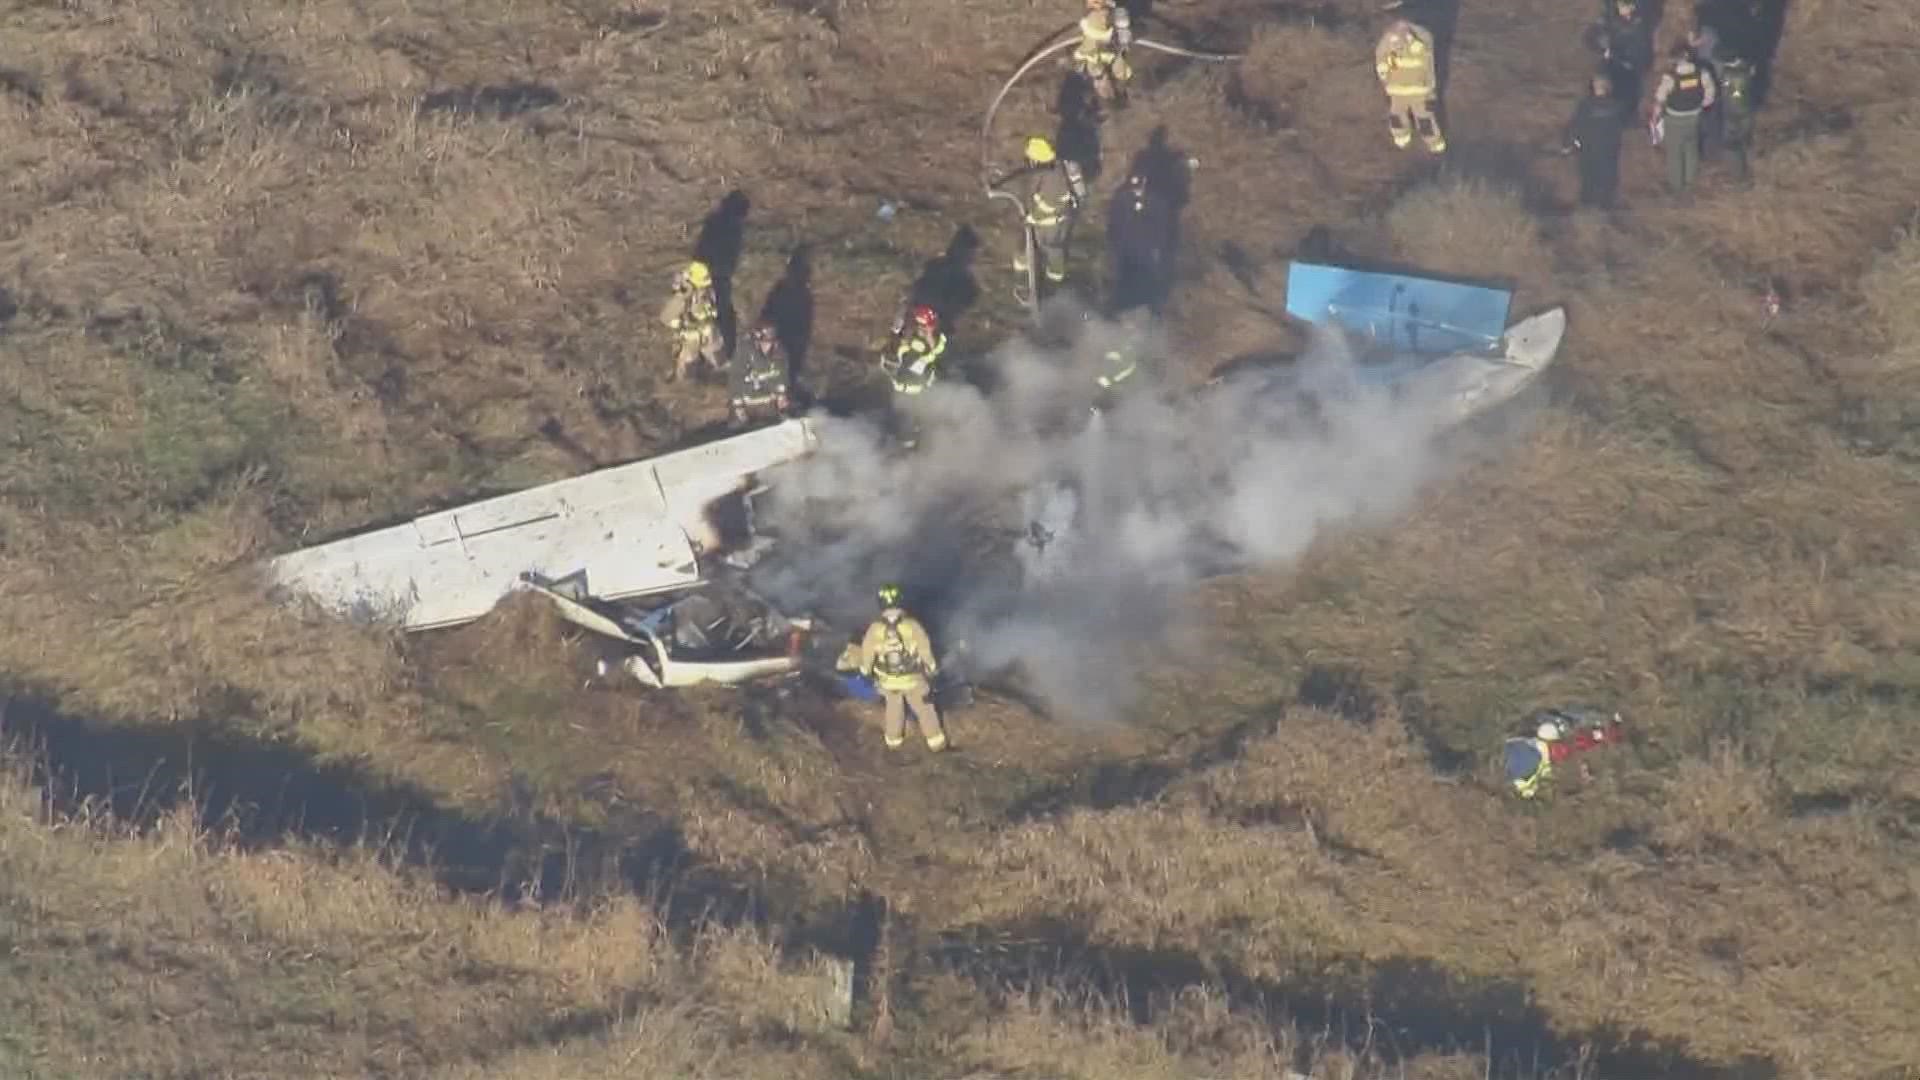 The plane was carrying four people, all of whom were killed in the crash on Nov. 18.